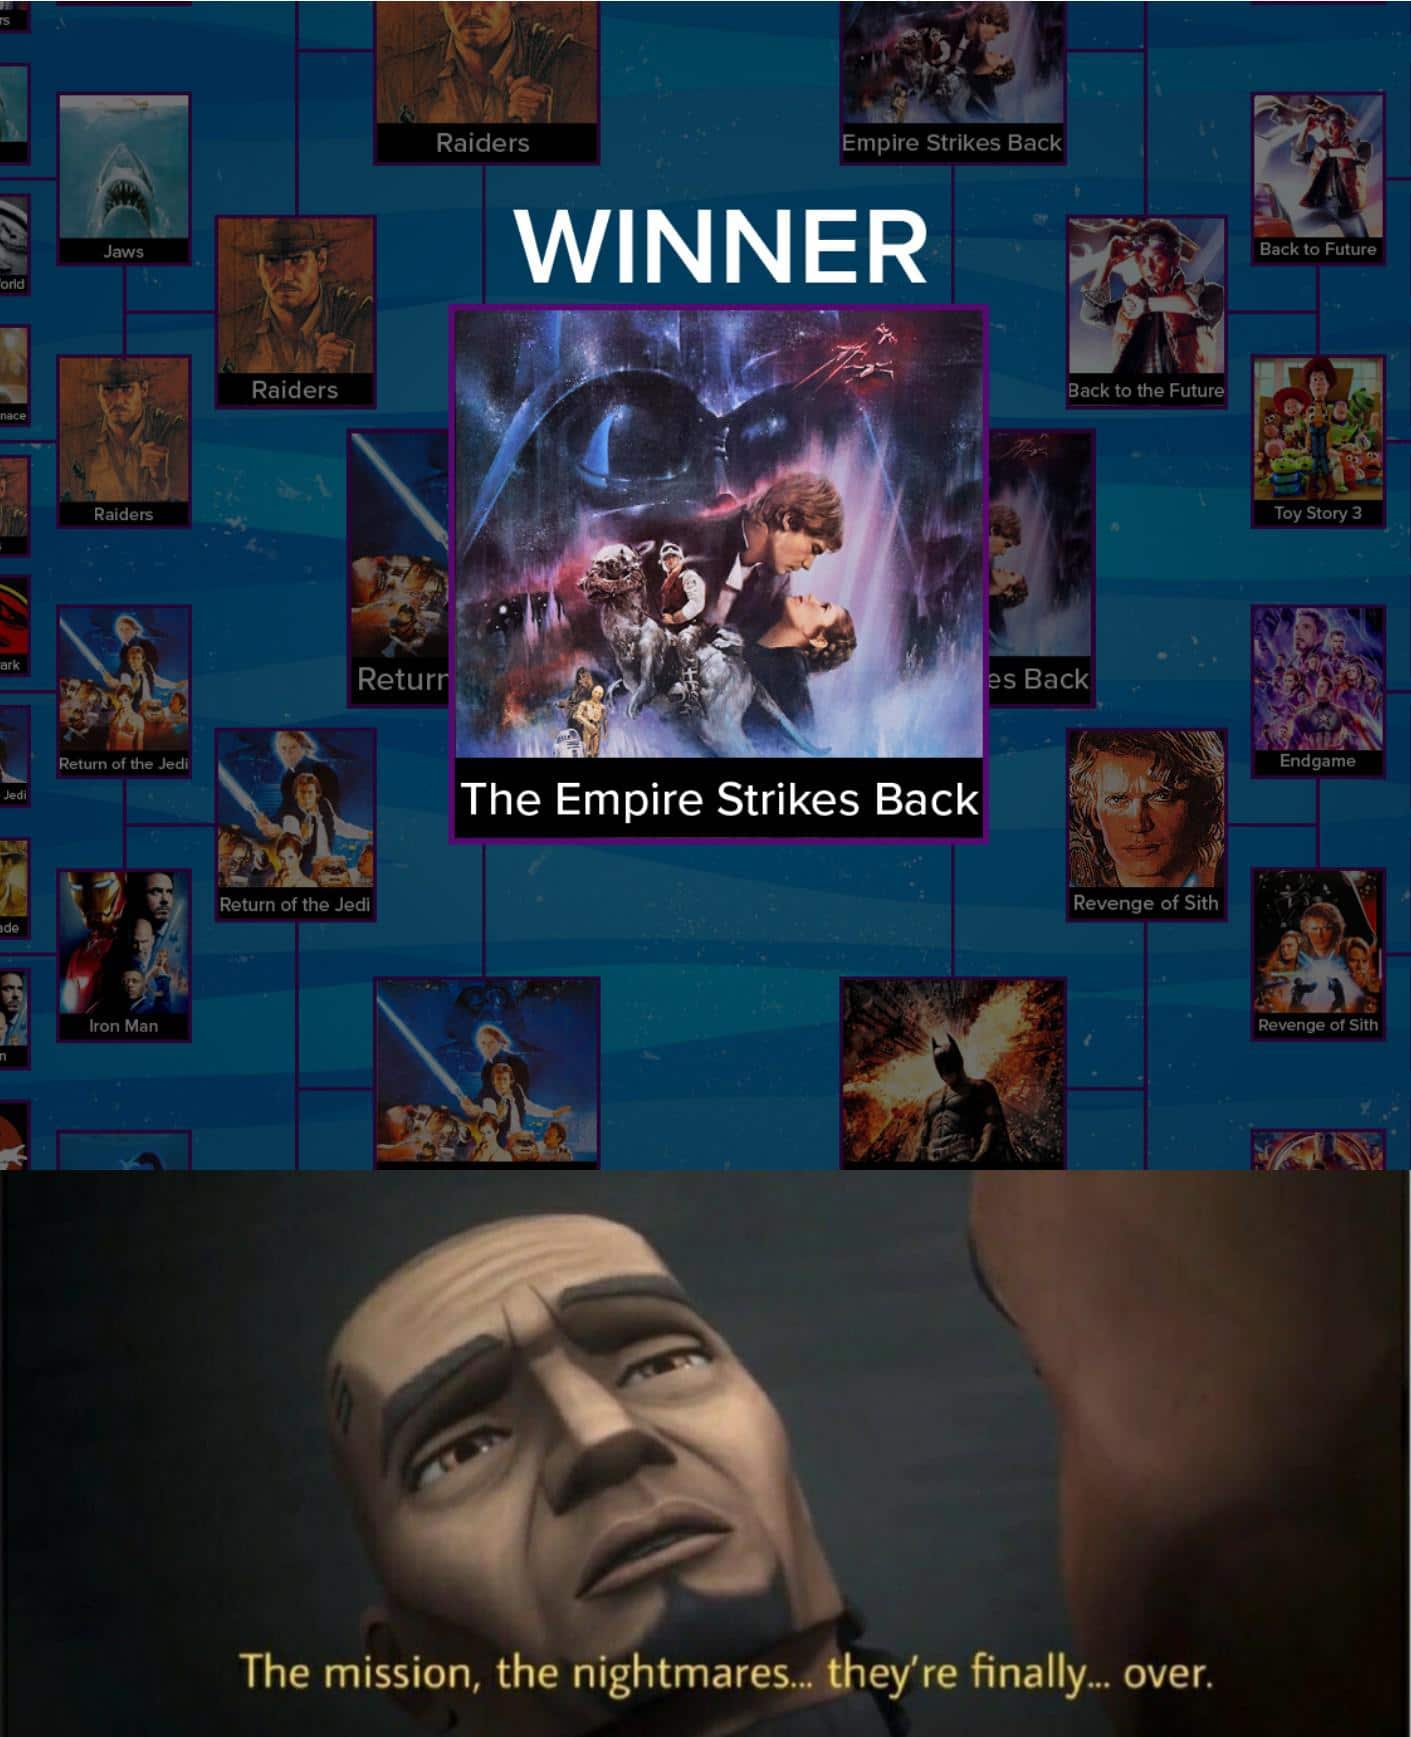 Prequel-memes, Sith, Star Wars, Revenge, ROTS, Lost Ark Star Wars Memes Prequel-memes, Sith, Star Wars, Revenge, ROTS, Lost Ark text: Raiders Empire Strikes Back Jaws Odd n ace Raiders ark Return of the Jedi Jedi Back to Future Raiders WINNER Returr The Empire Strikes Back Back to the Future Toy Story 3 BaCk Endgame Revenge of Sith Return of the Jedi Iron Man The mission, the nightmares.„ they're finally„. Revenge of Sith over. 